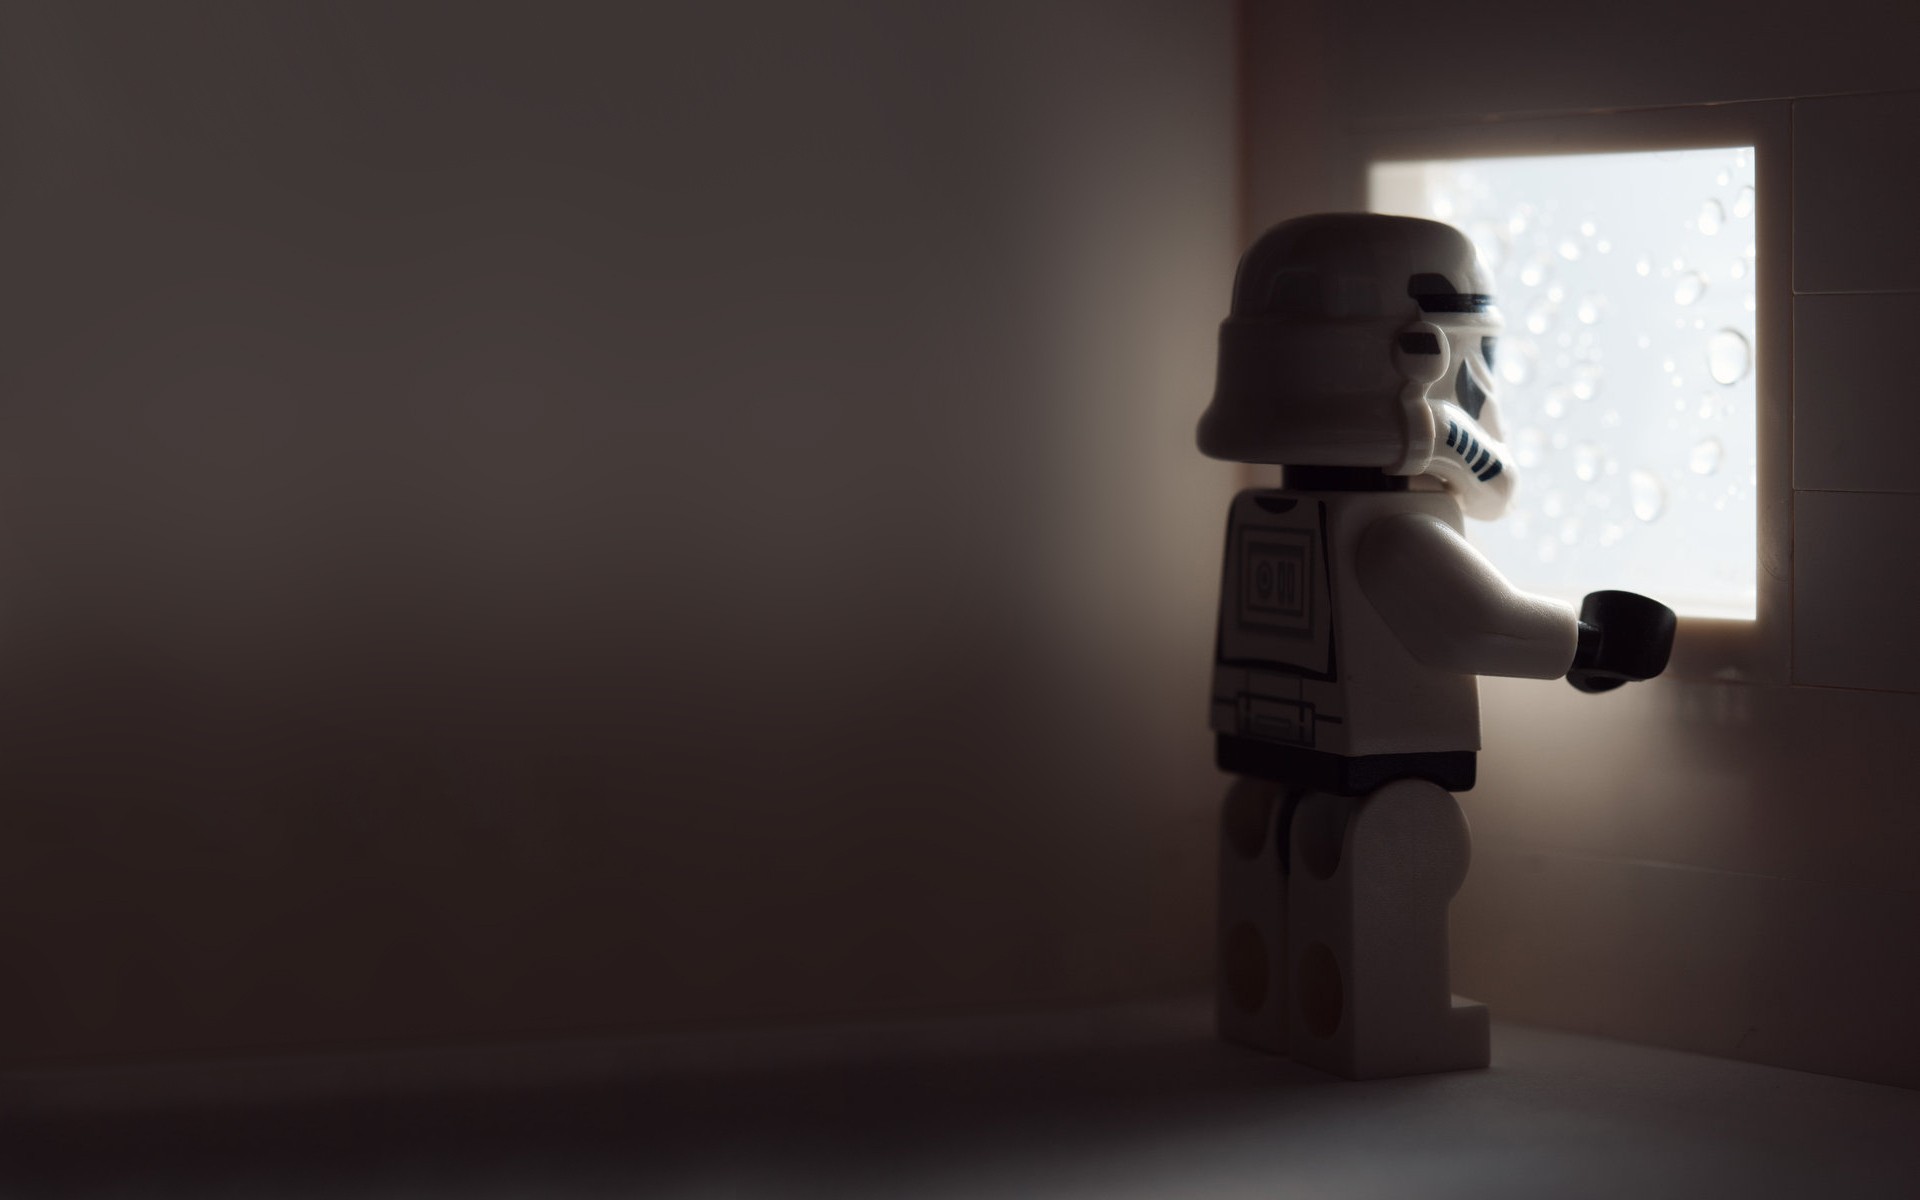 Funny Lego Wallpapers